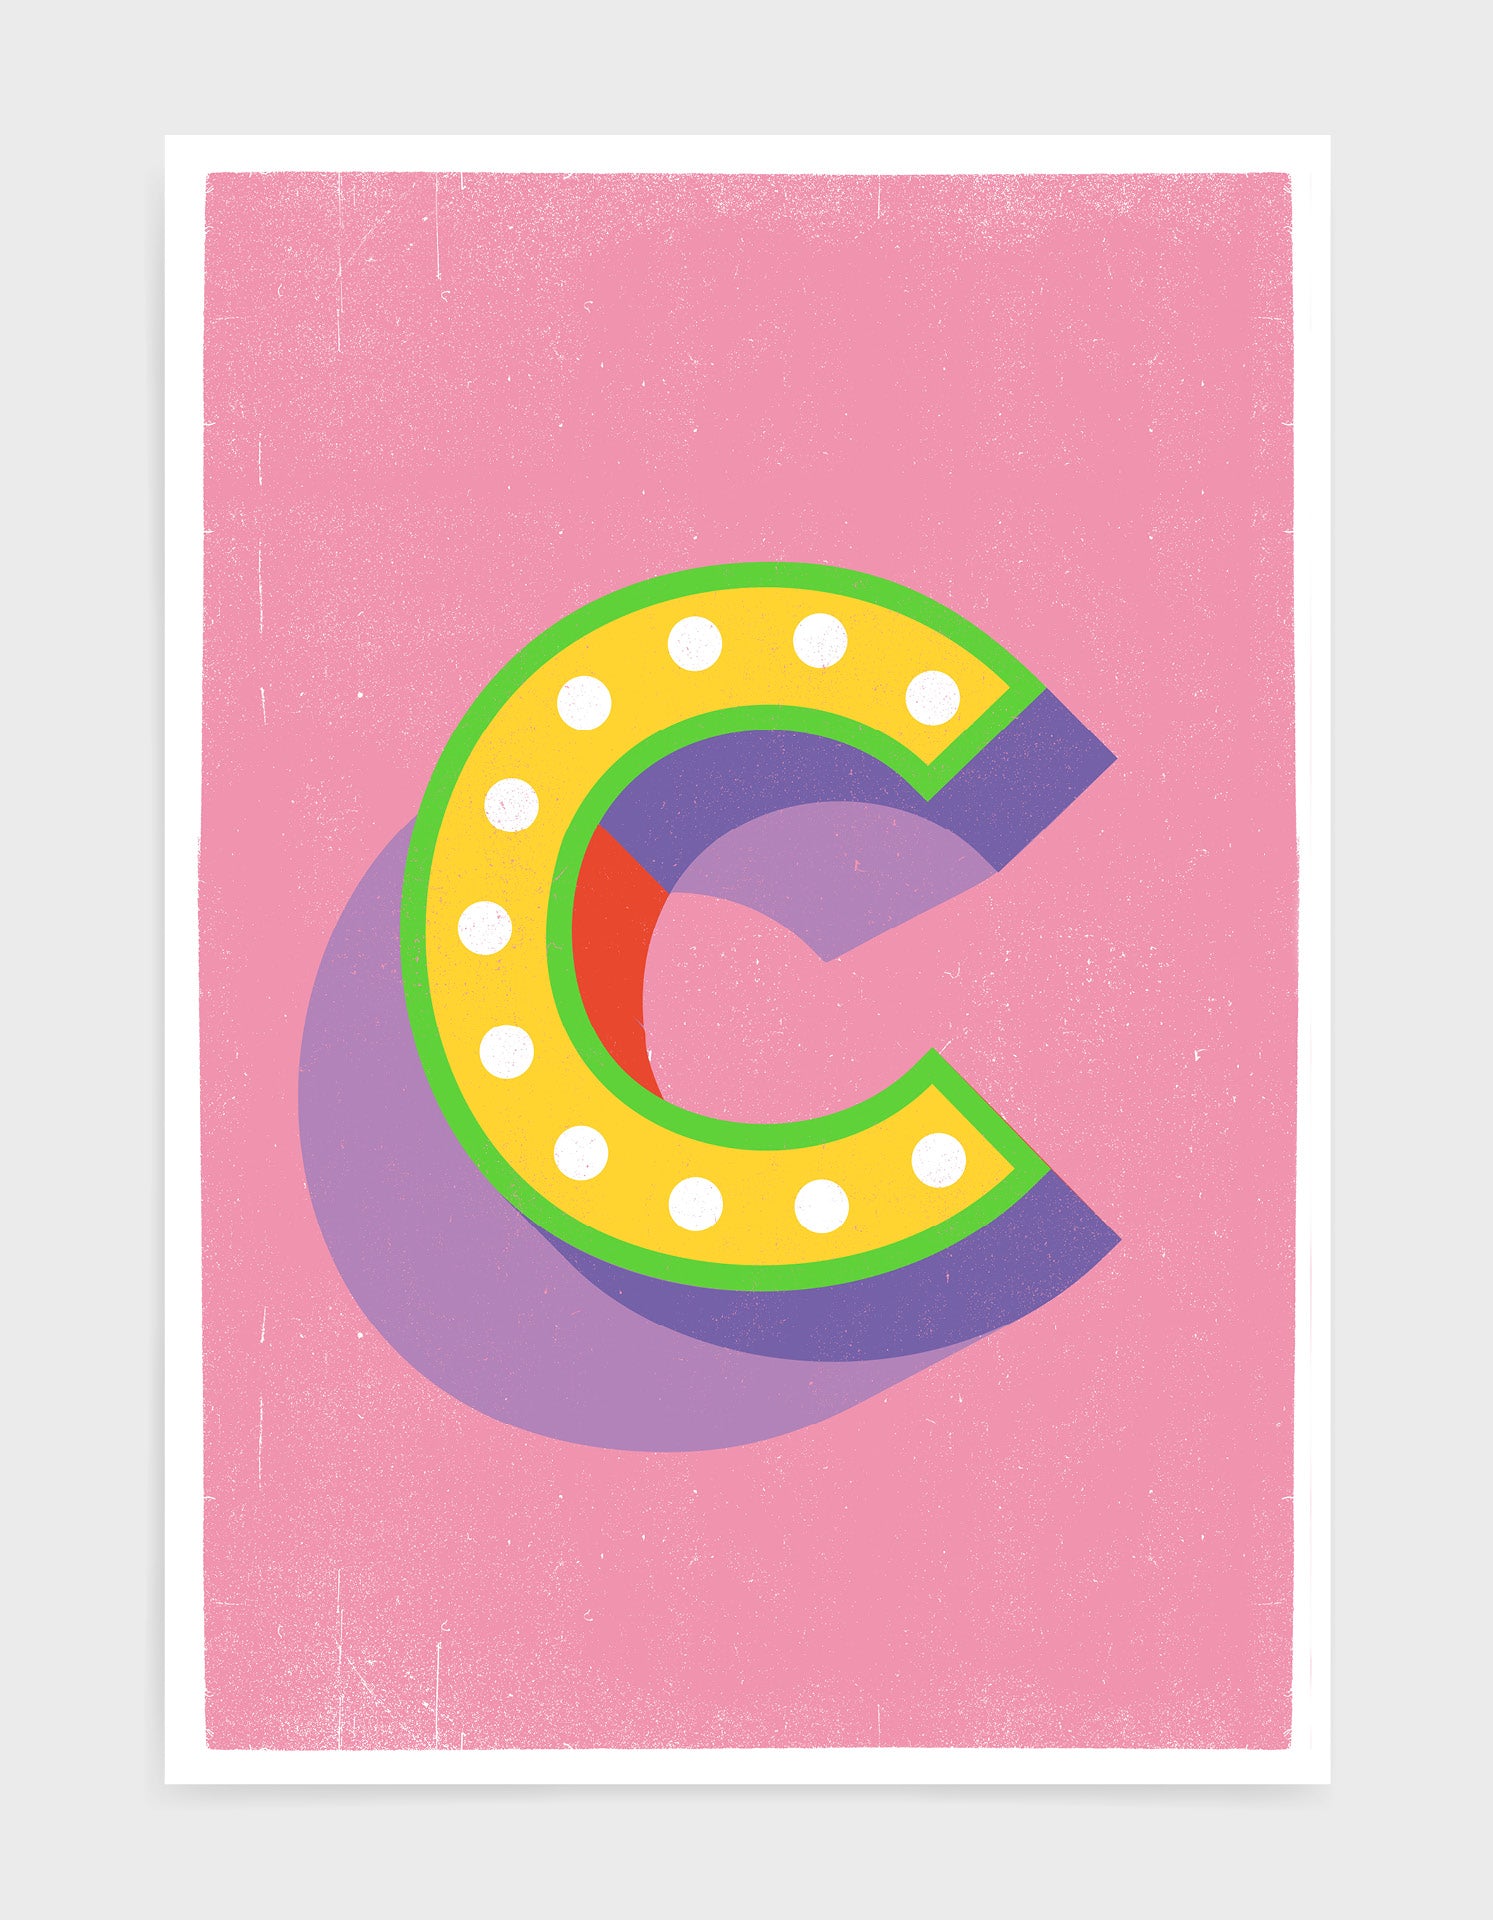 Alphabet print - lights on font in yellow against a pink background - letter c